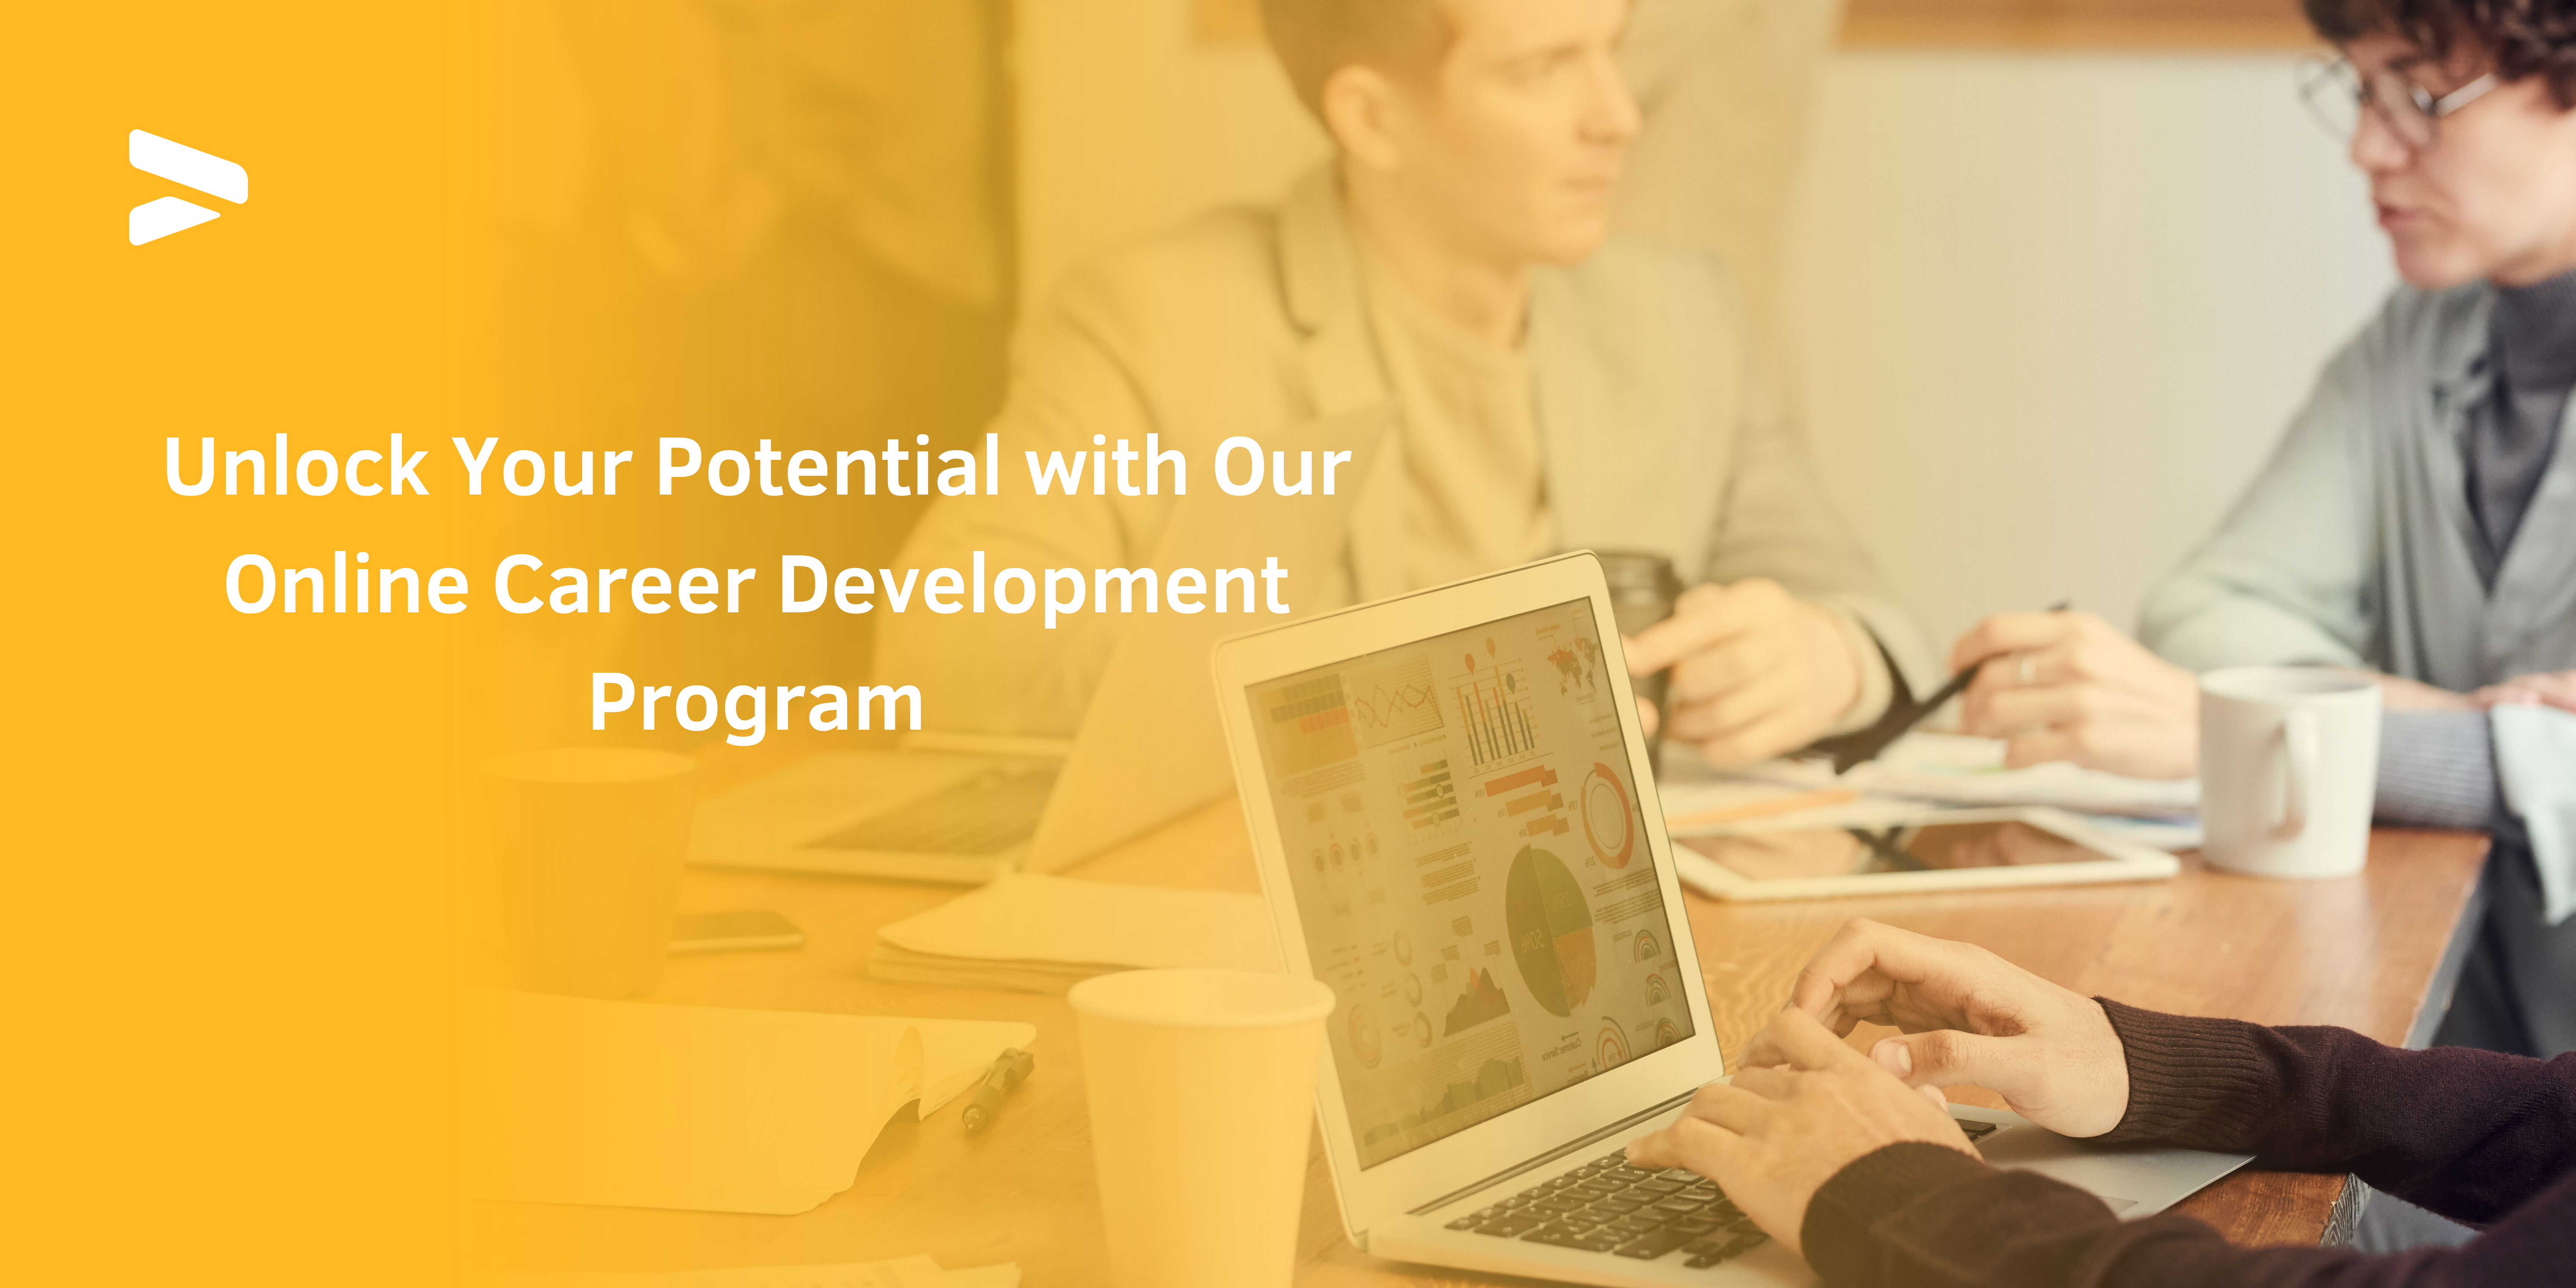 Unlock-Your-Potential-with-Our-Online-Career-Development-Program-